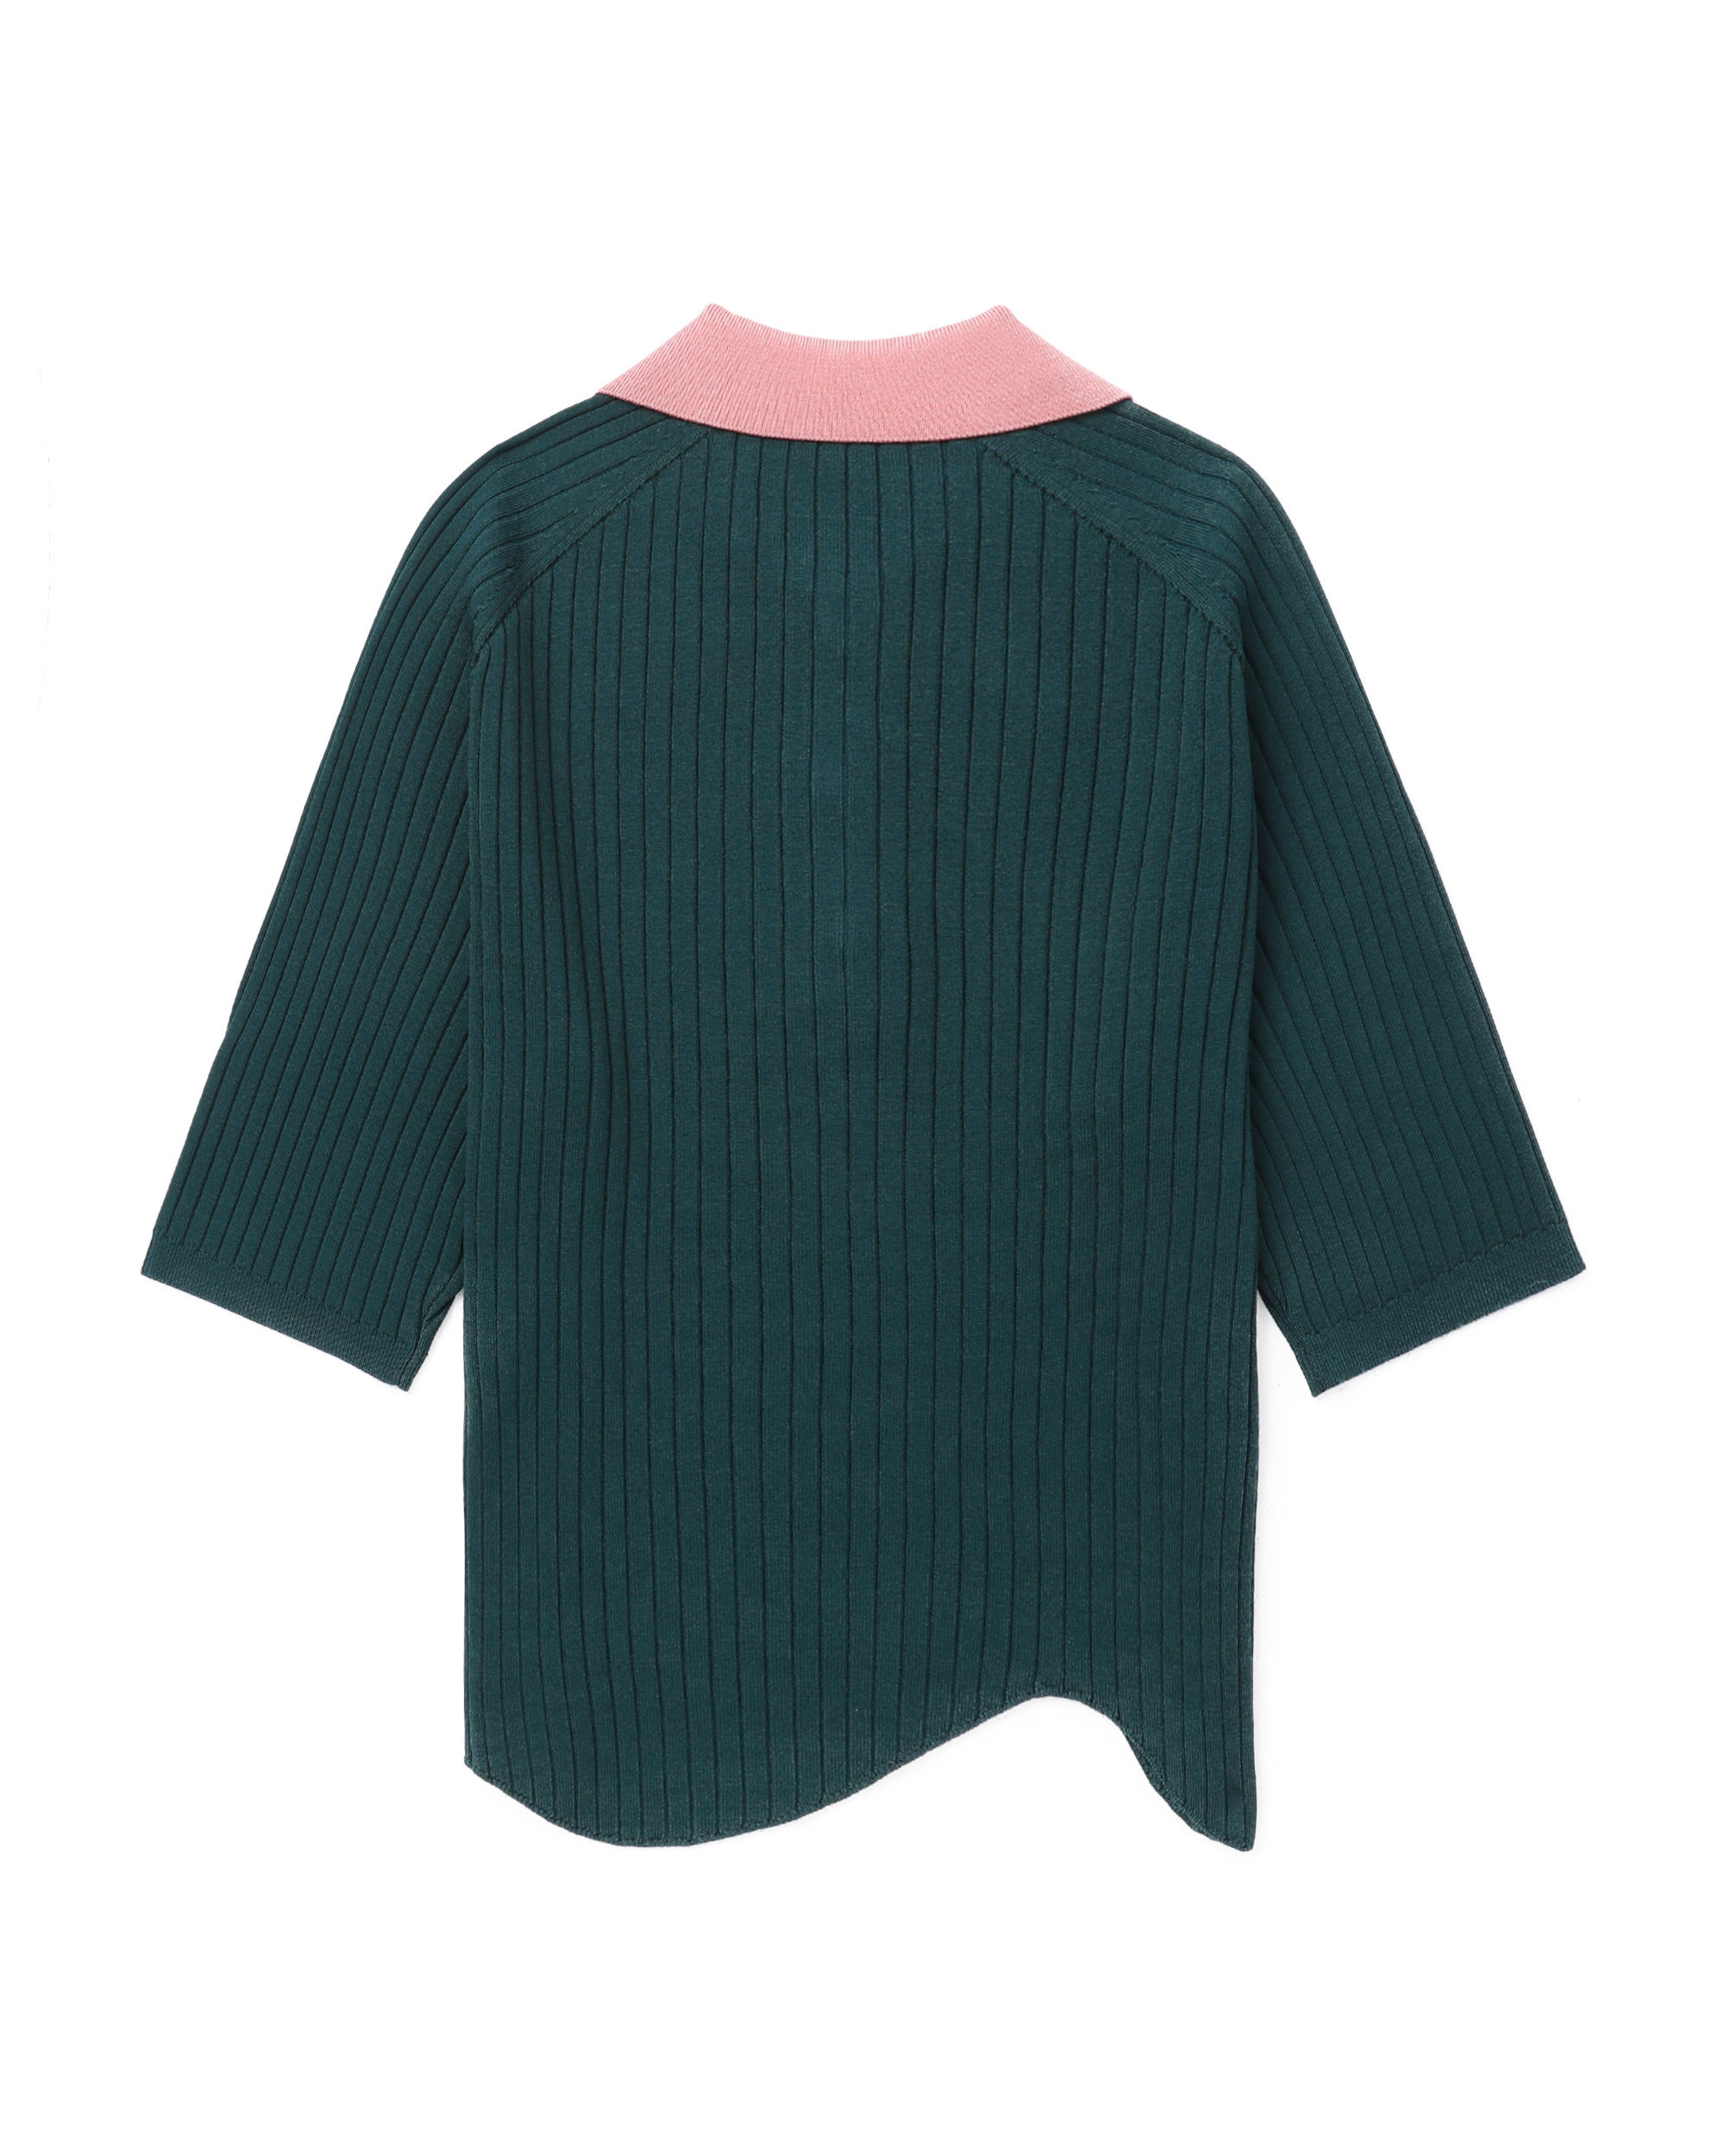 TOGA ARCHIVES Ribbed knit top | ITeSHOP